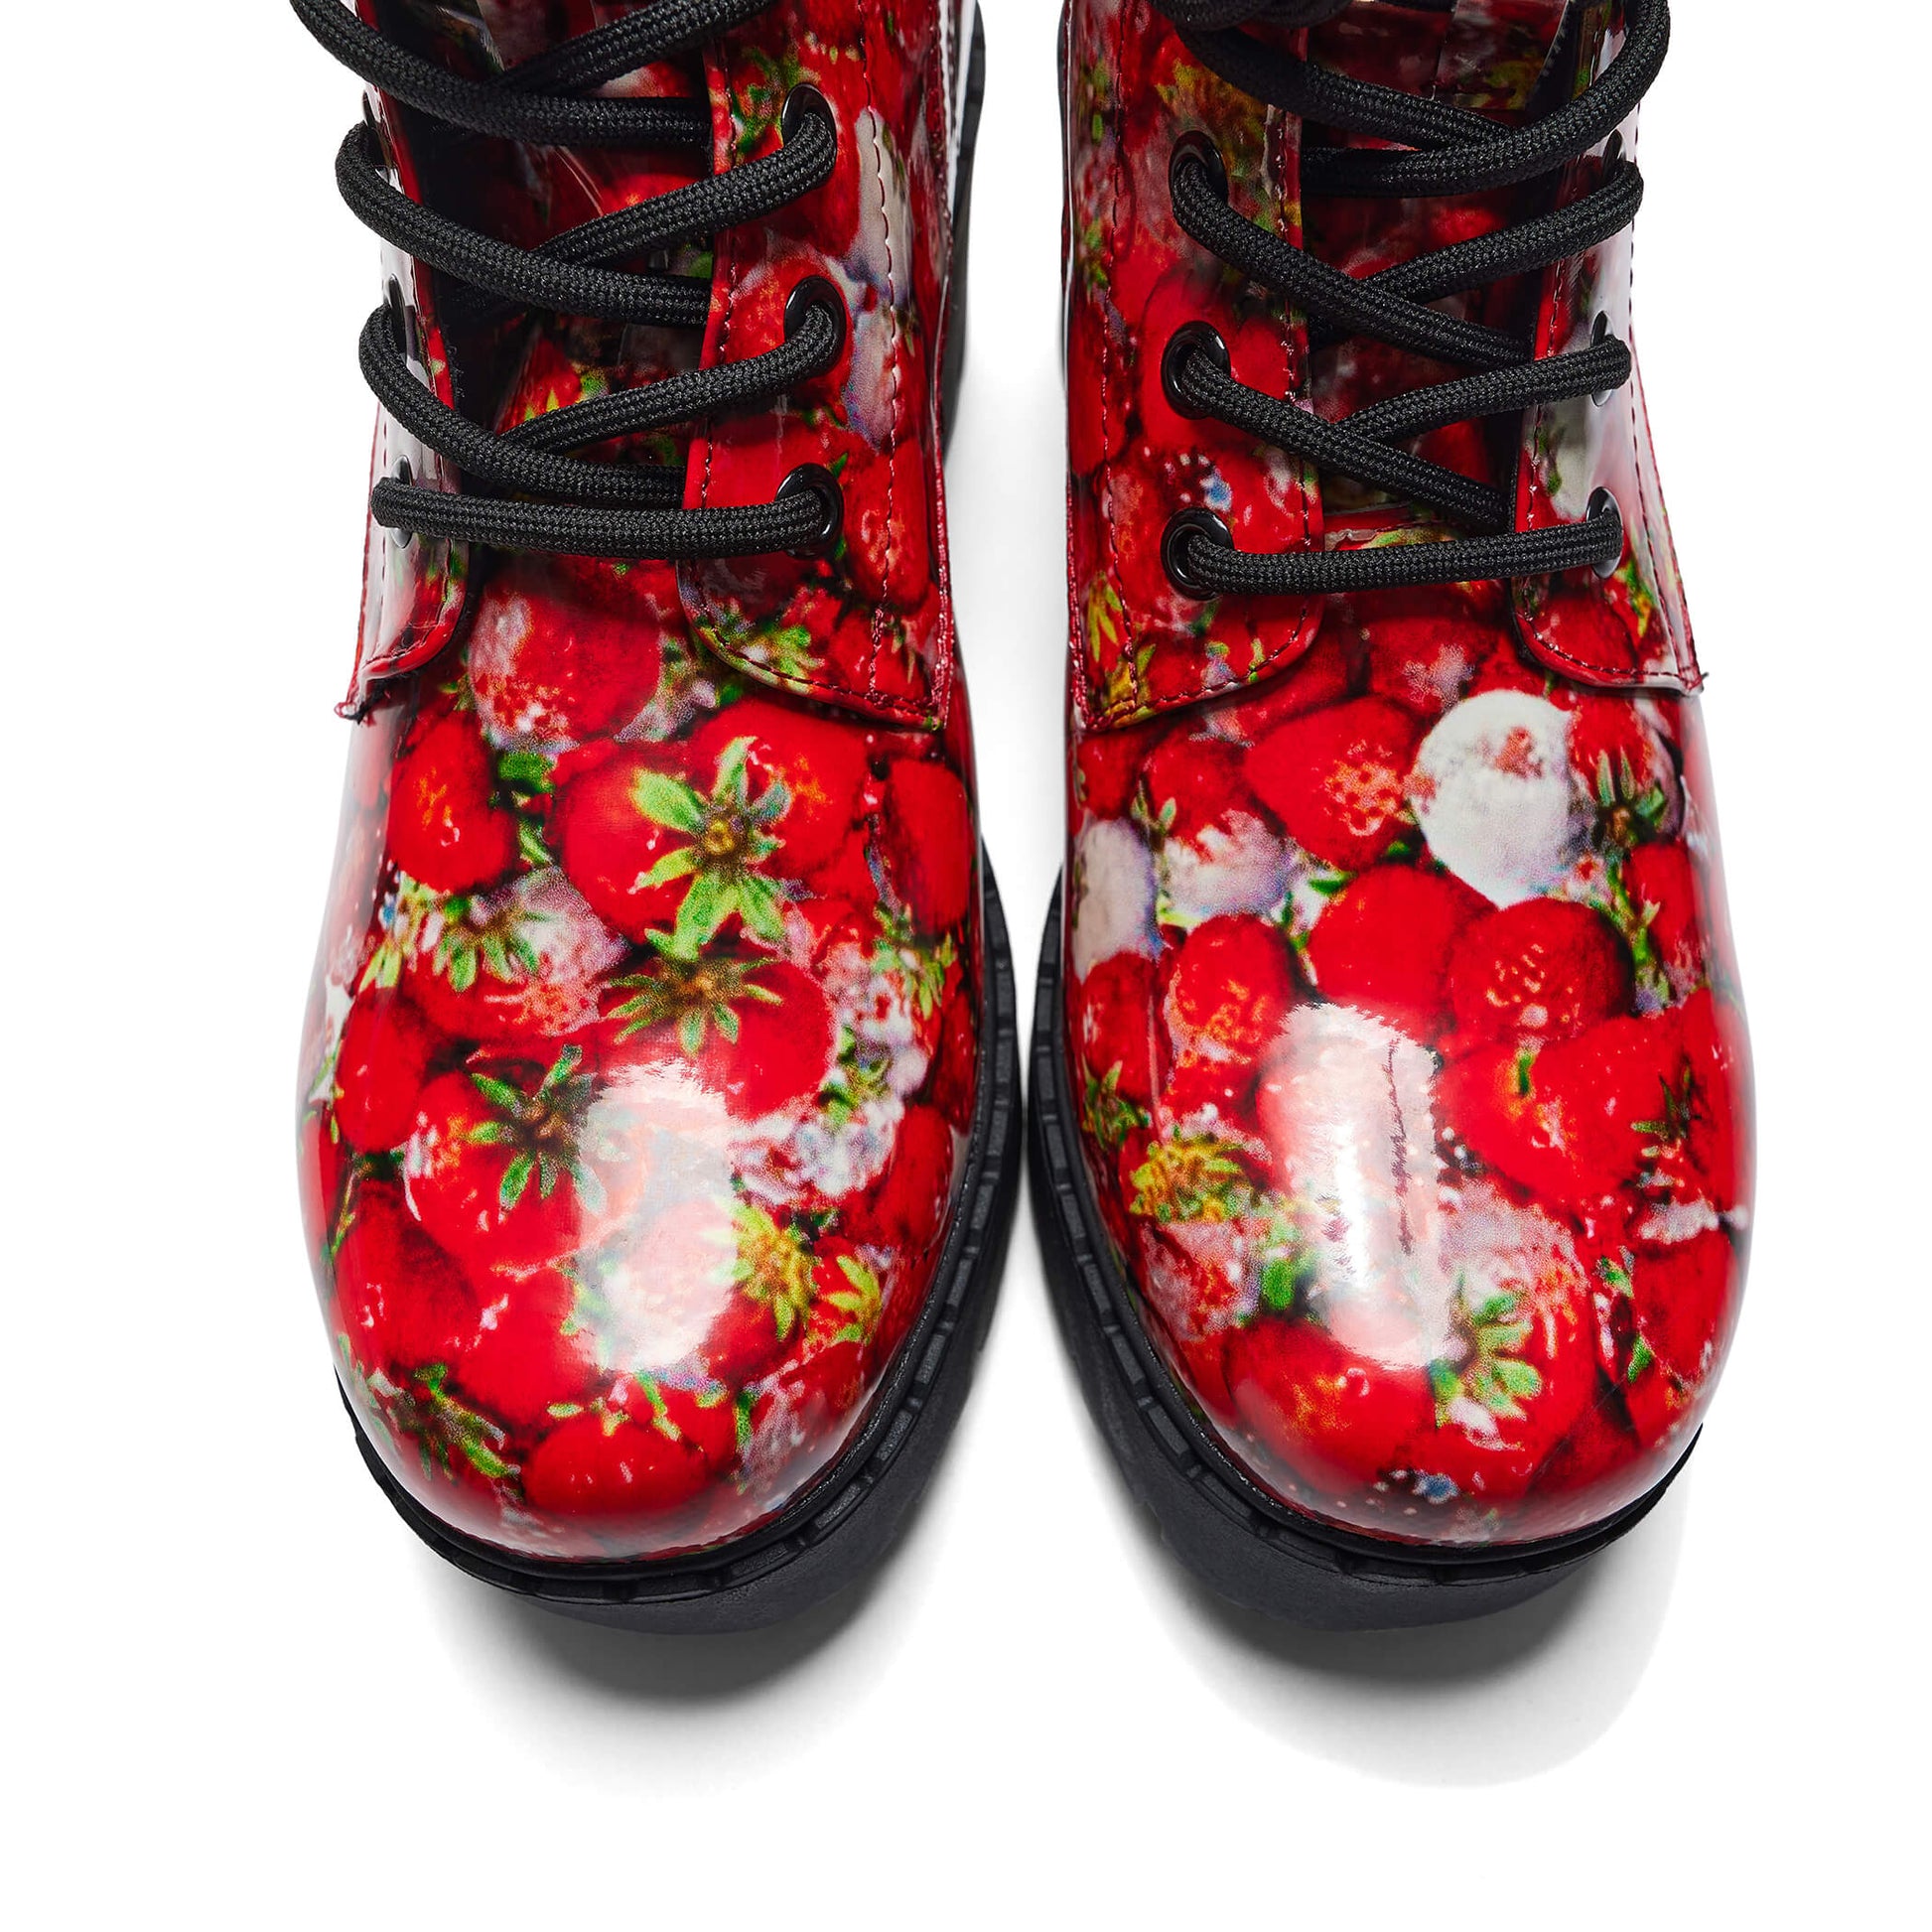 Frozen Strawberries Switch Boots - Ankle Boots - KOI Footwear - Red - Top View